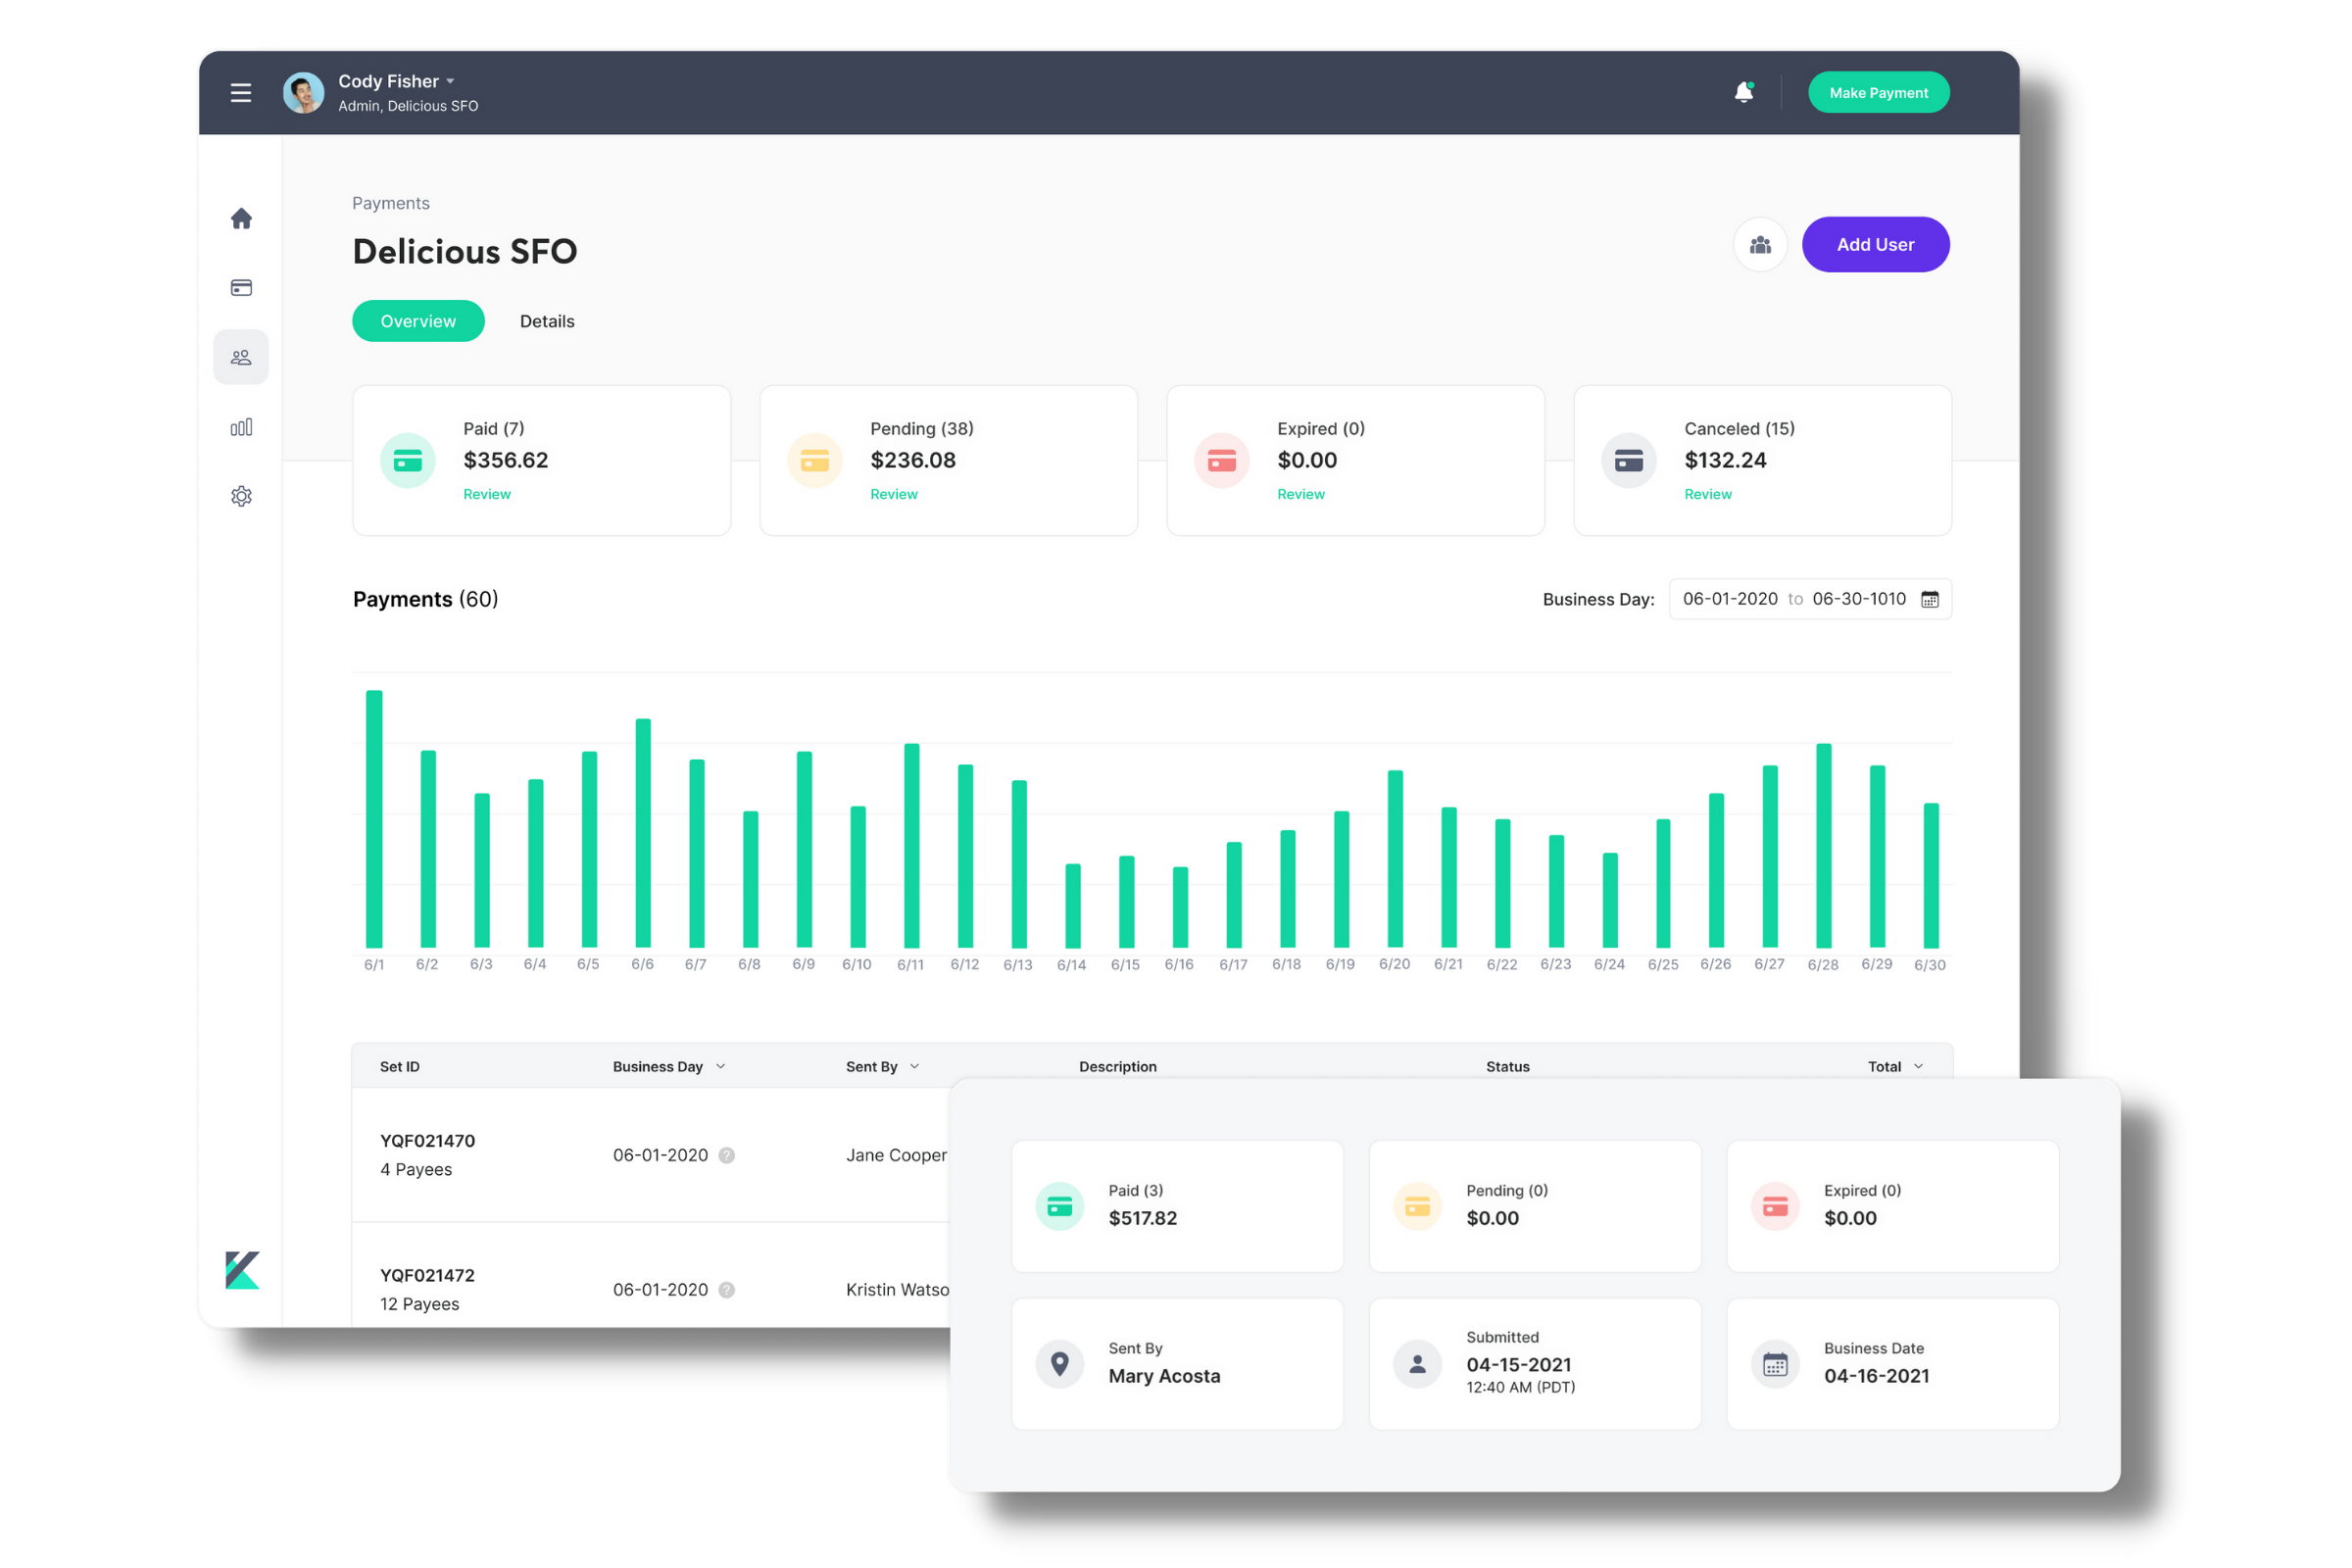 Kickfin reporting: Kickfin makes tracking and reporting a breeze. You can view the full payment history for your entire organization, for individual locations, and for all employees.